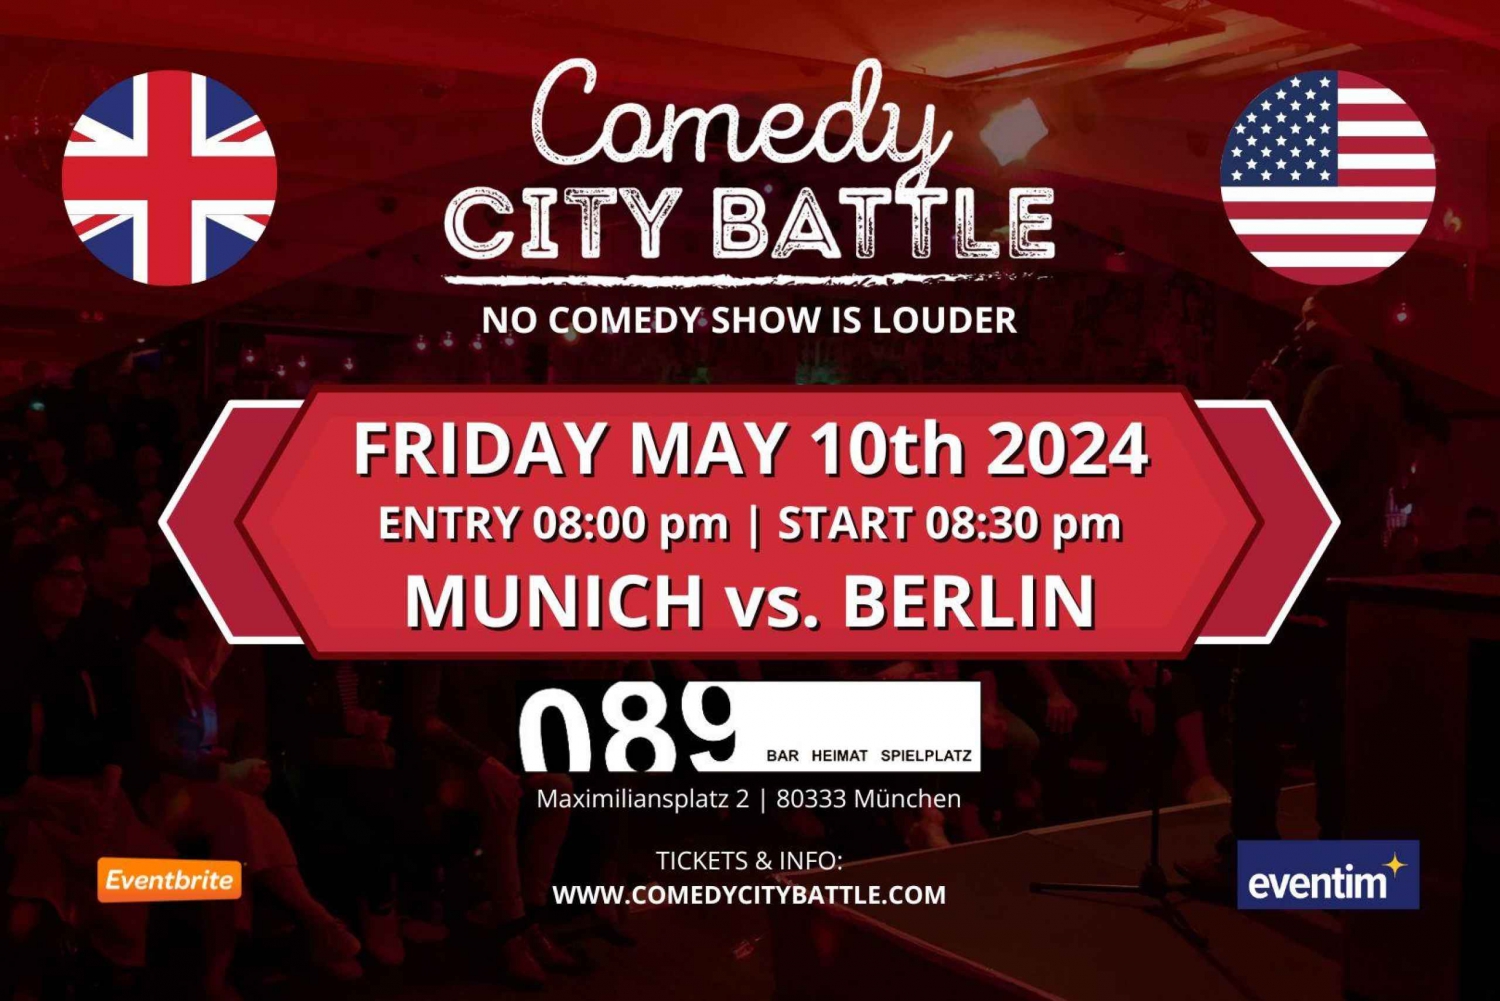 Comedy City Battle - the loudest comedy show in the world